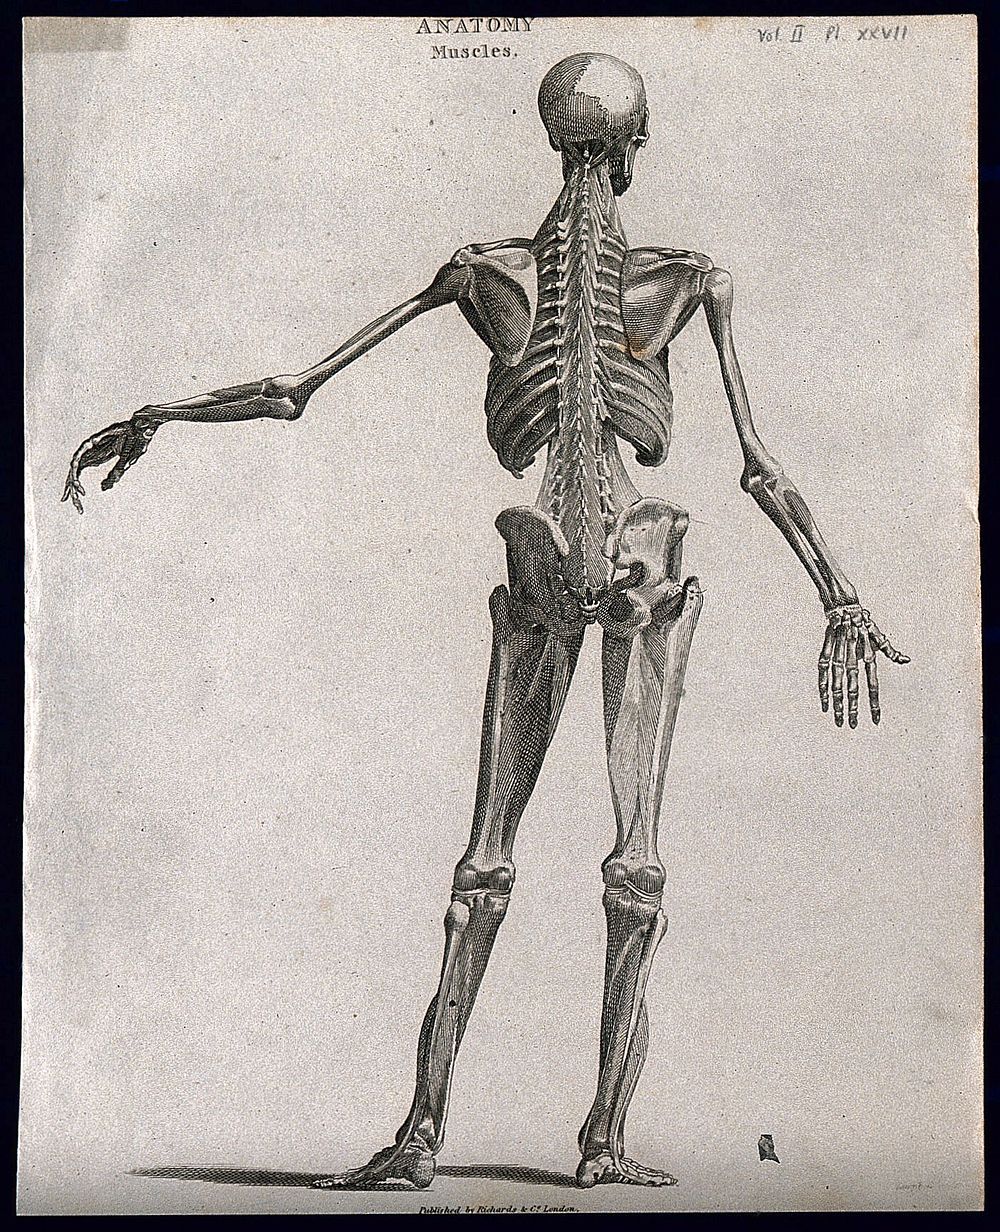 An écorché showing bones, with left arm extended to the side, seen from behind. Line engraving by Campbell, 1816/1821.